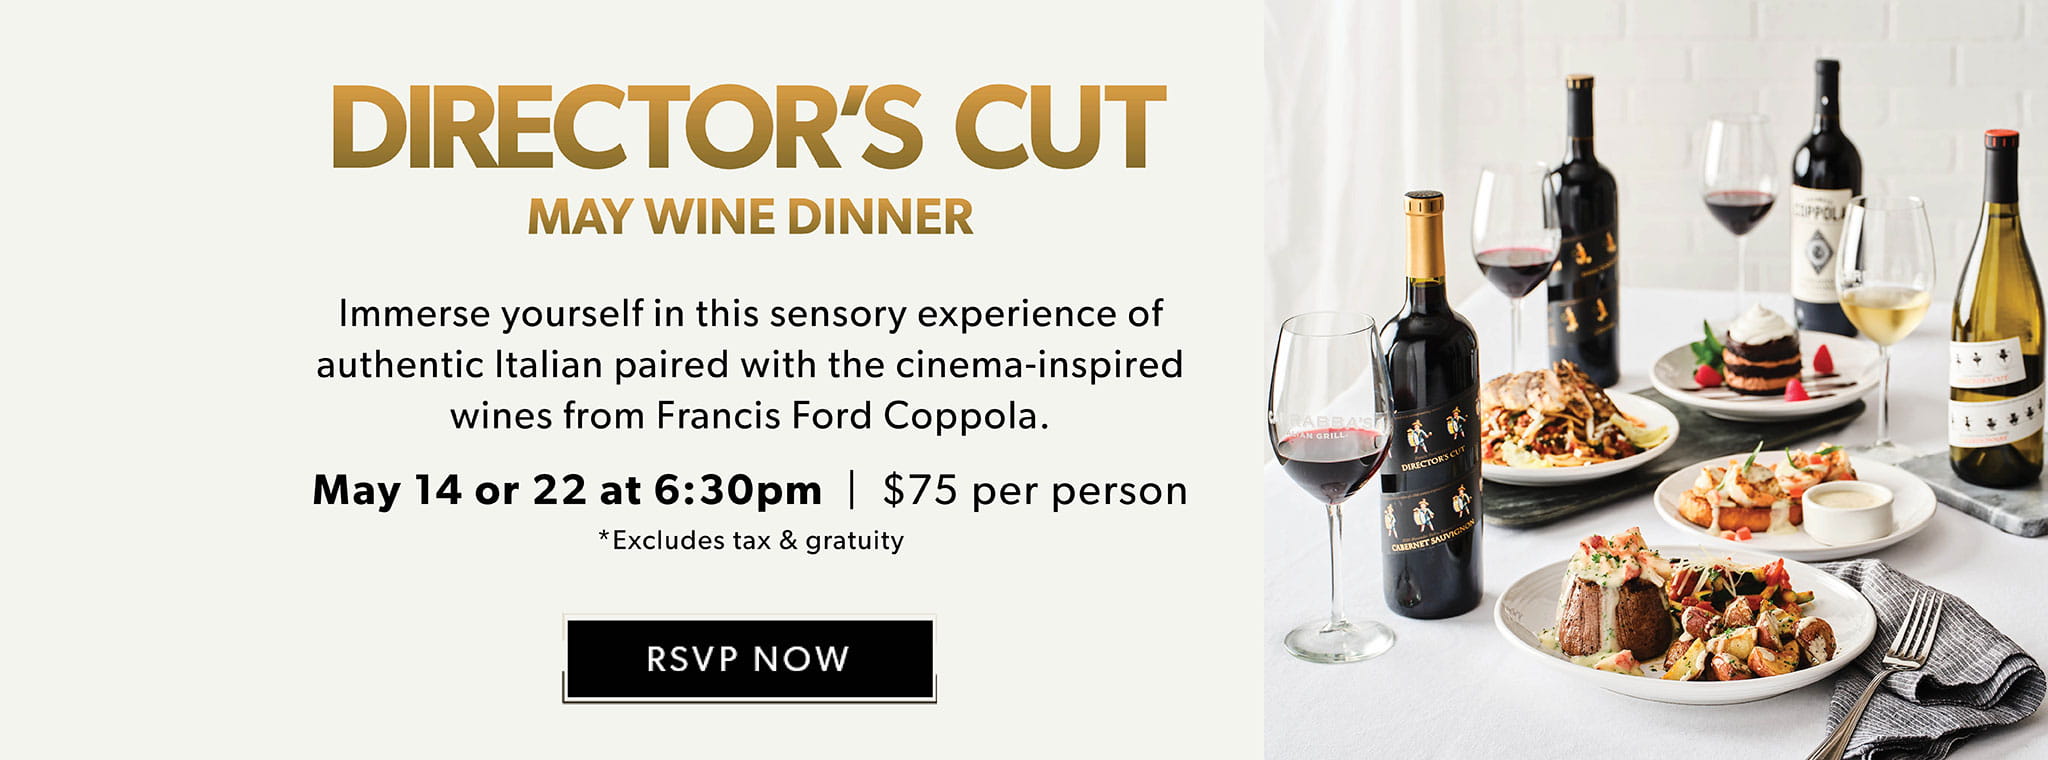 Director's Cut May Wine Dinner